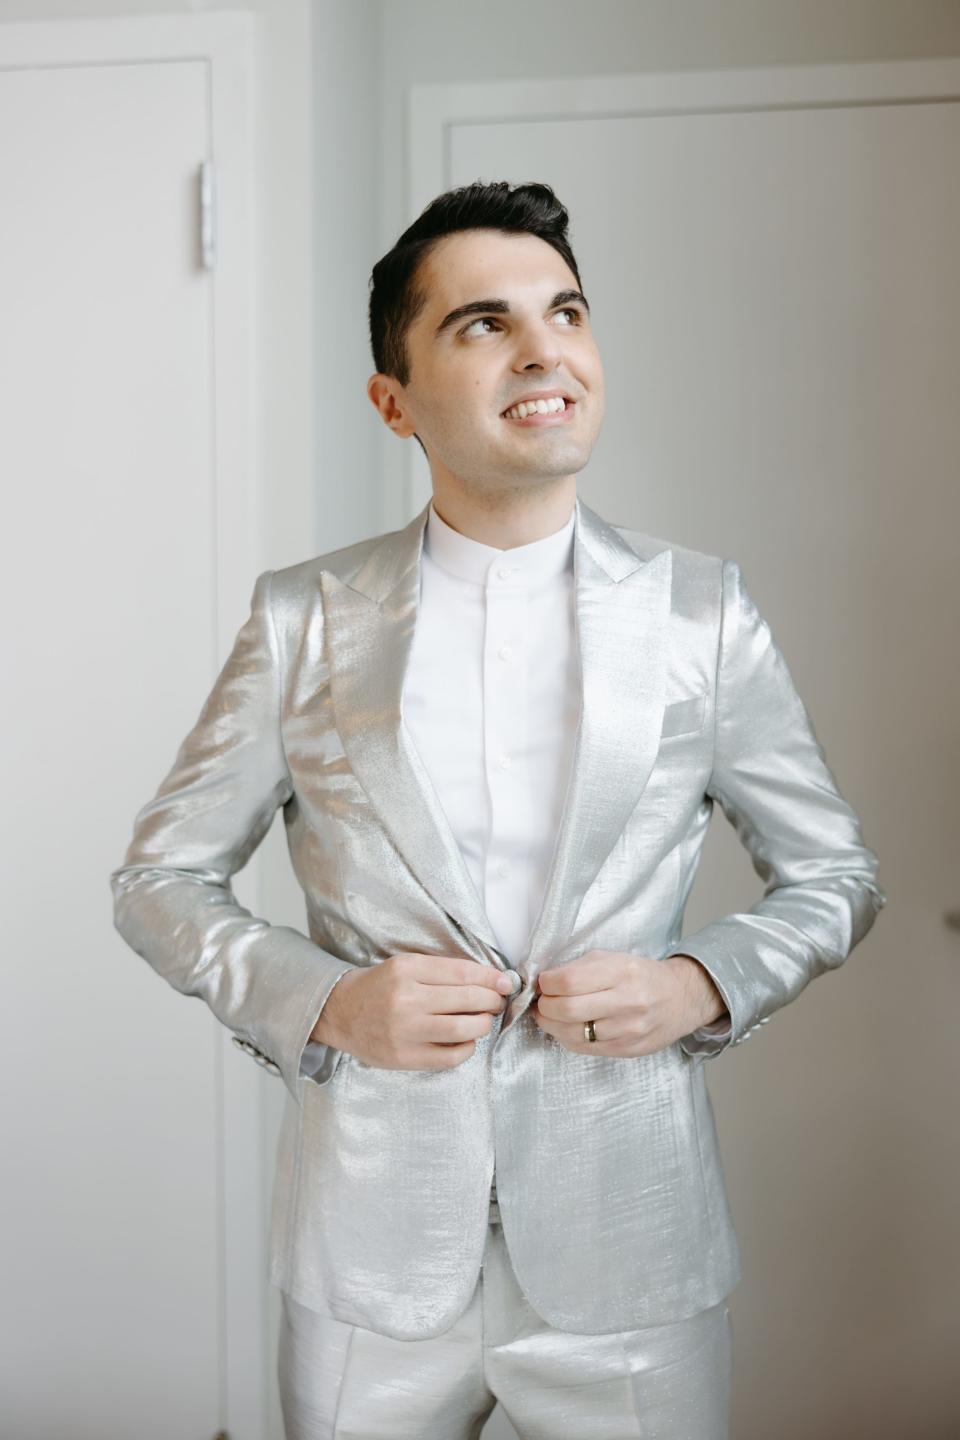 A man in a silver jacket and pants stands in a room.